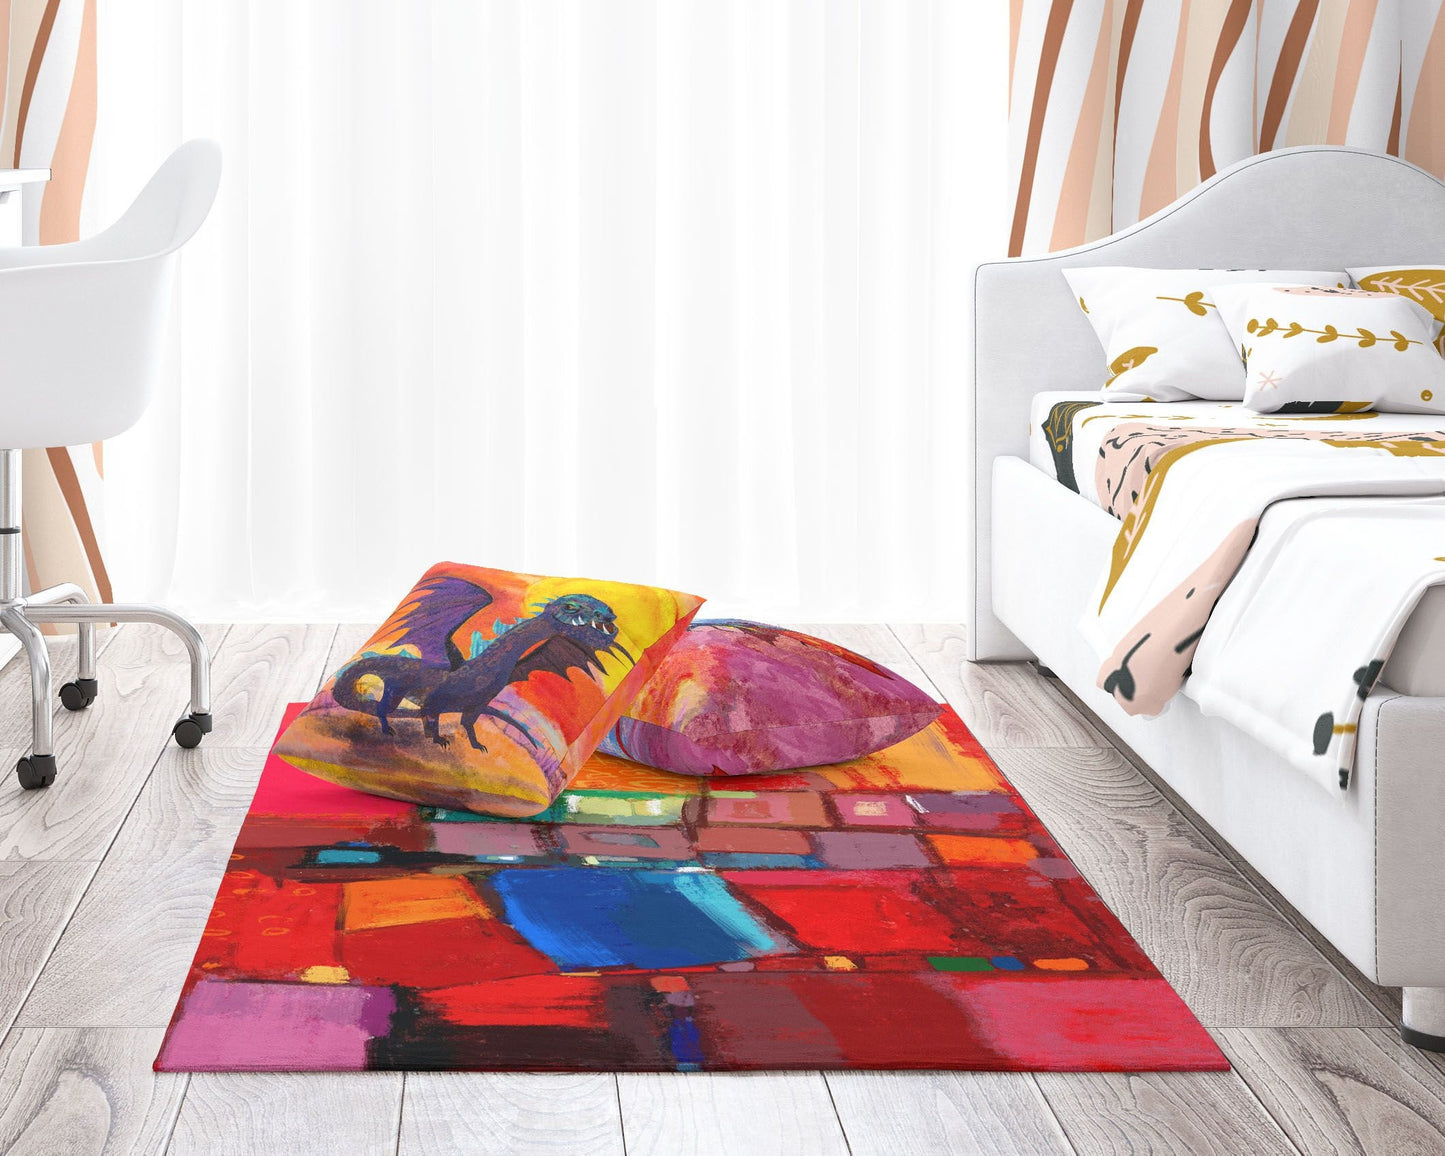 Red Rug, Decorative Rug, Area Rug 4X6, Durable Rug, Rectangle Rugs, Rainbow Rug, Abstract Rug, Stylish Carpet, Gift For Her, Made In Usa